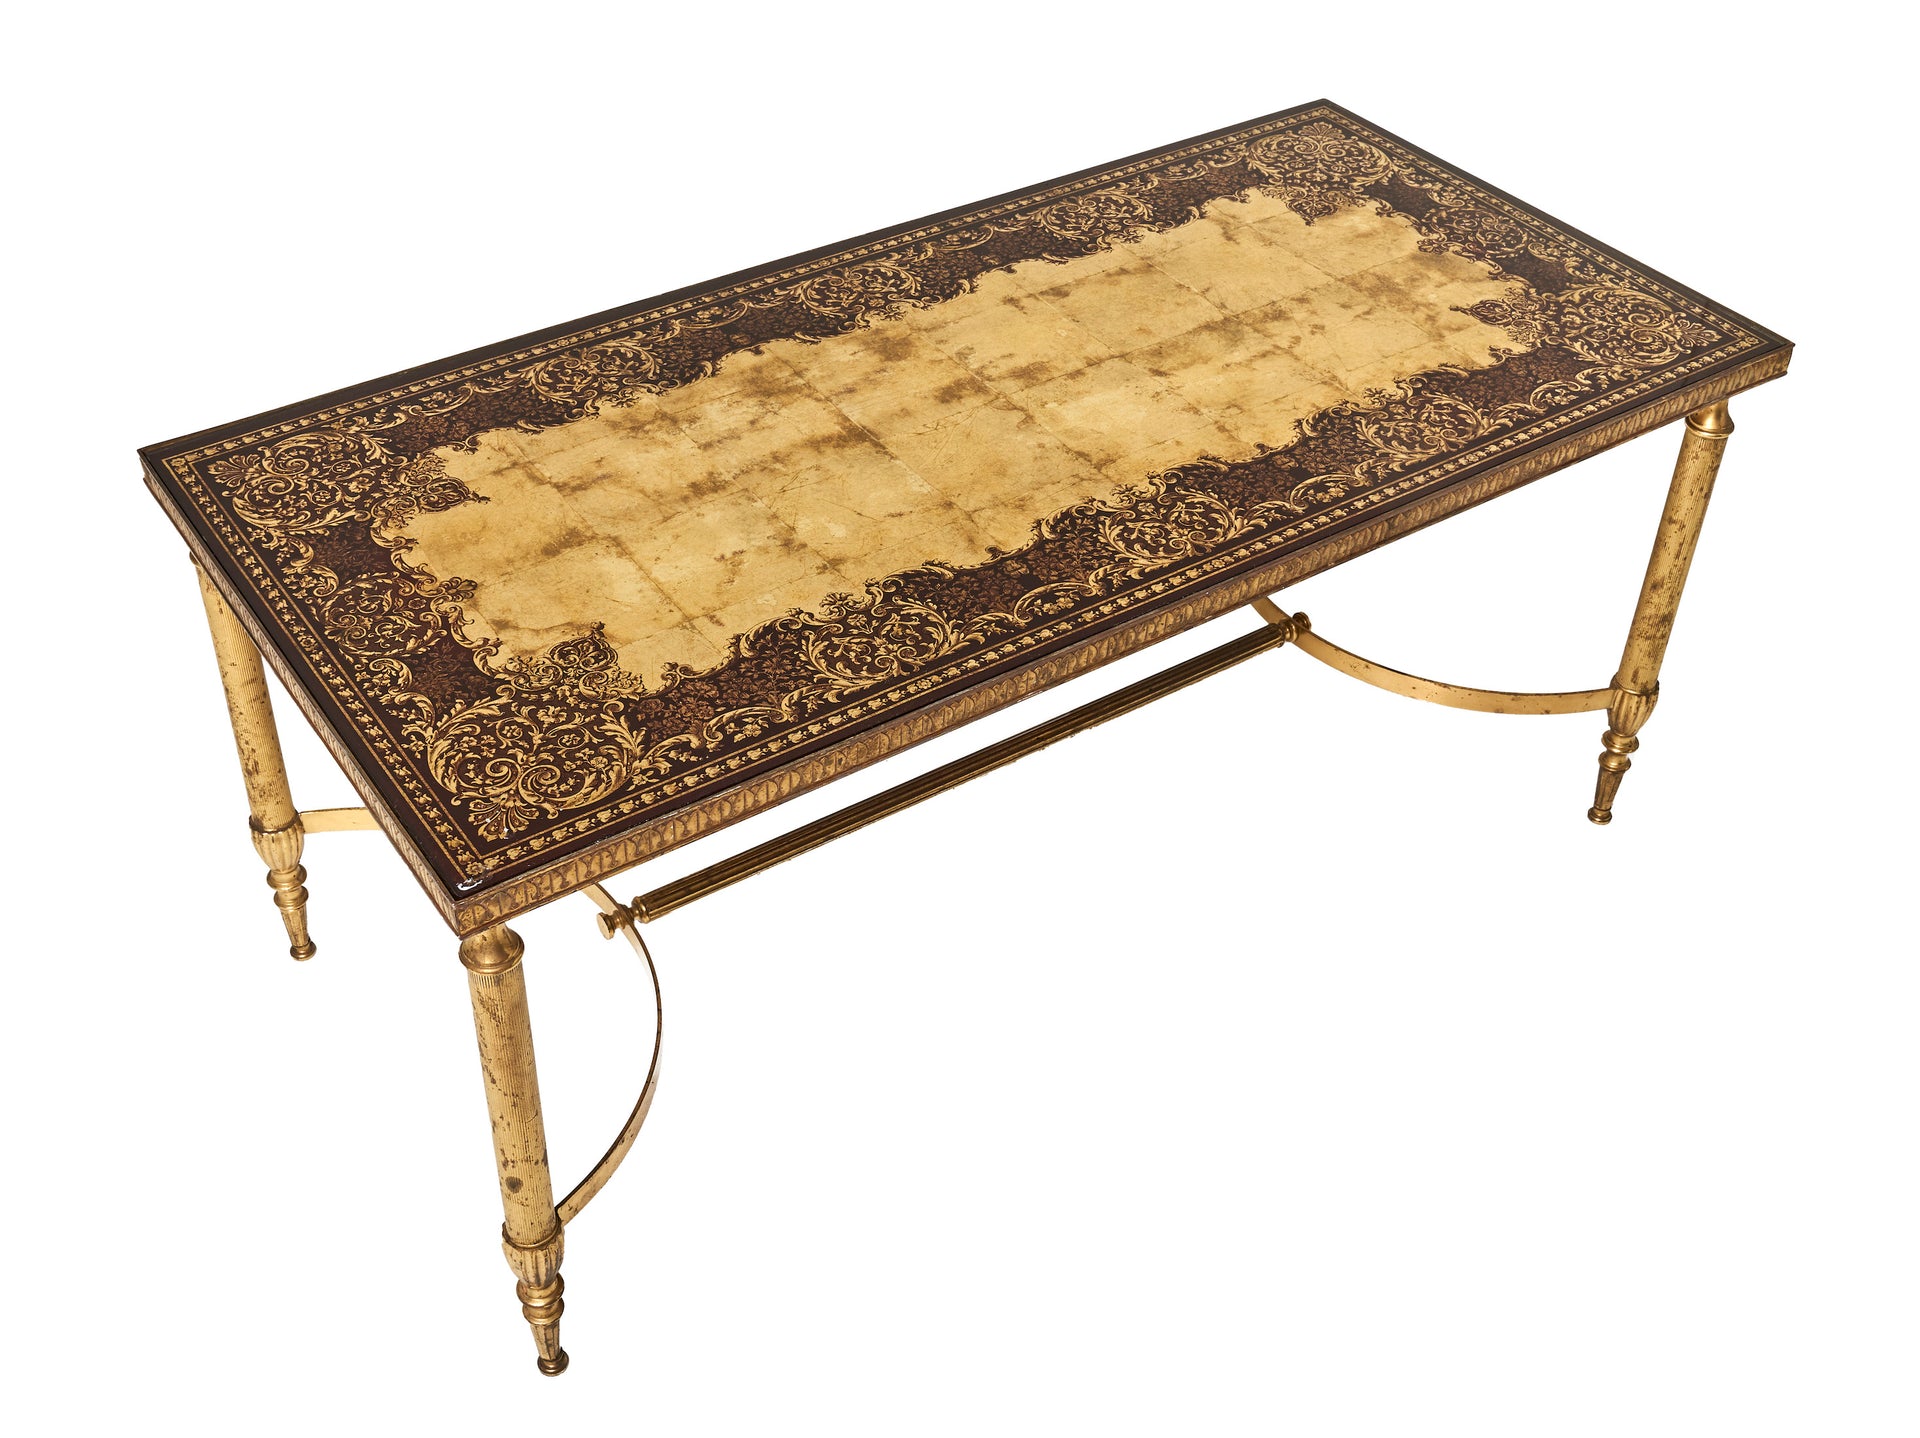 SOLD A fine quality coffee table in brass and glass, the ruby and gilt glass top decorated with arabesques, attributed to Maison Baguès, Paris Circa 1940